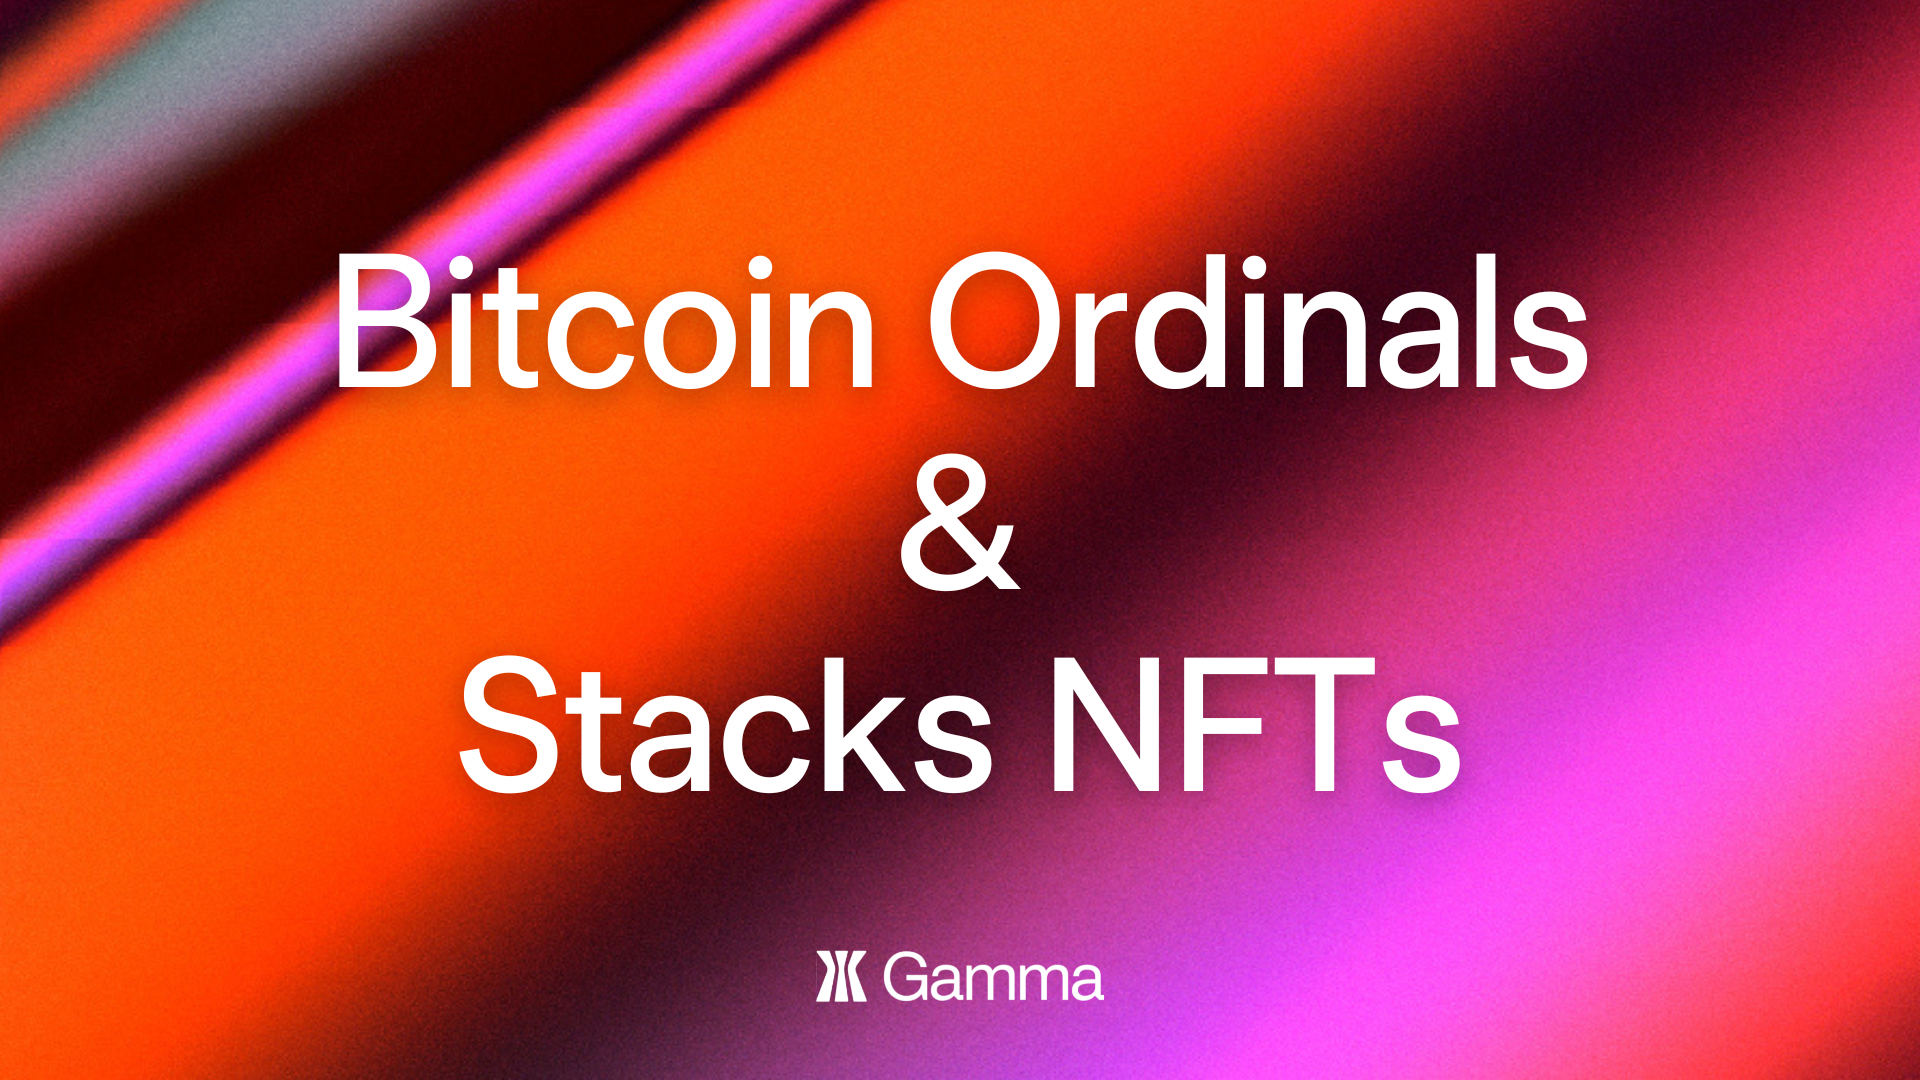 Bitcoin Ordinals and Stacks NFTs title card